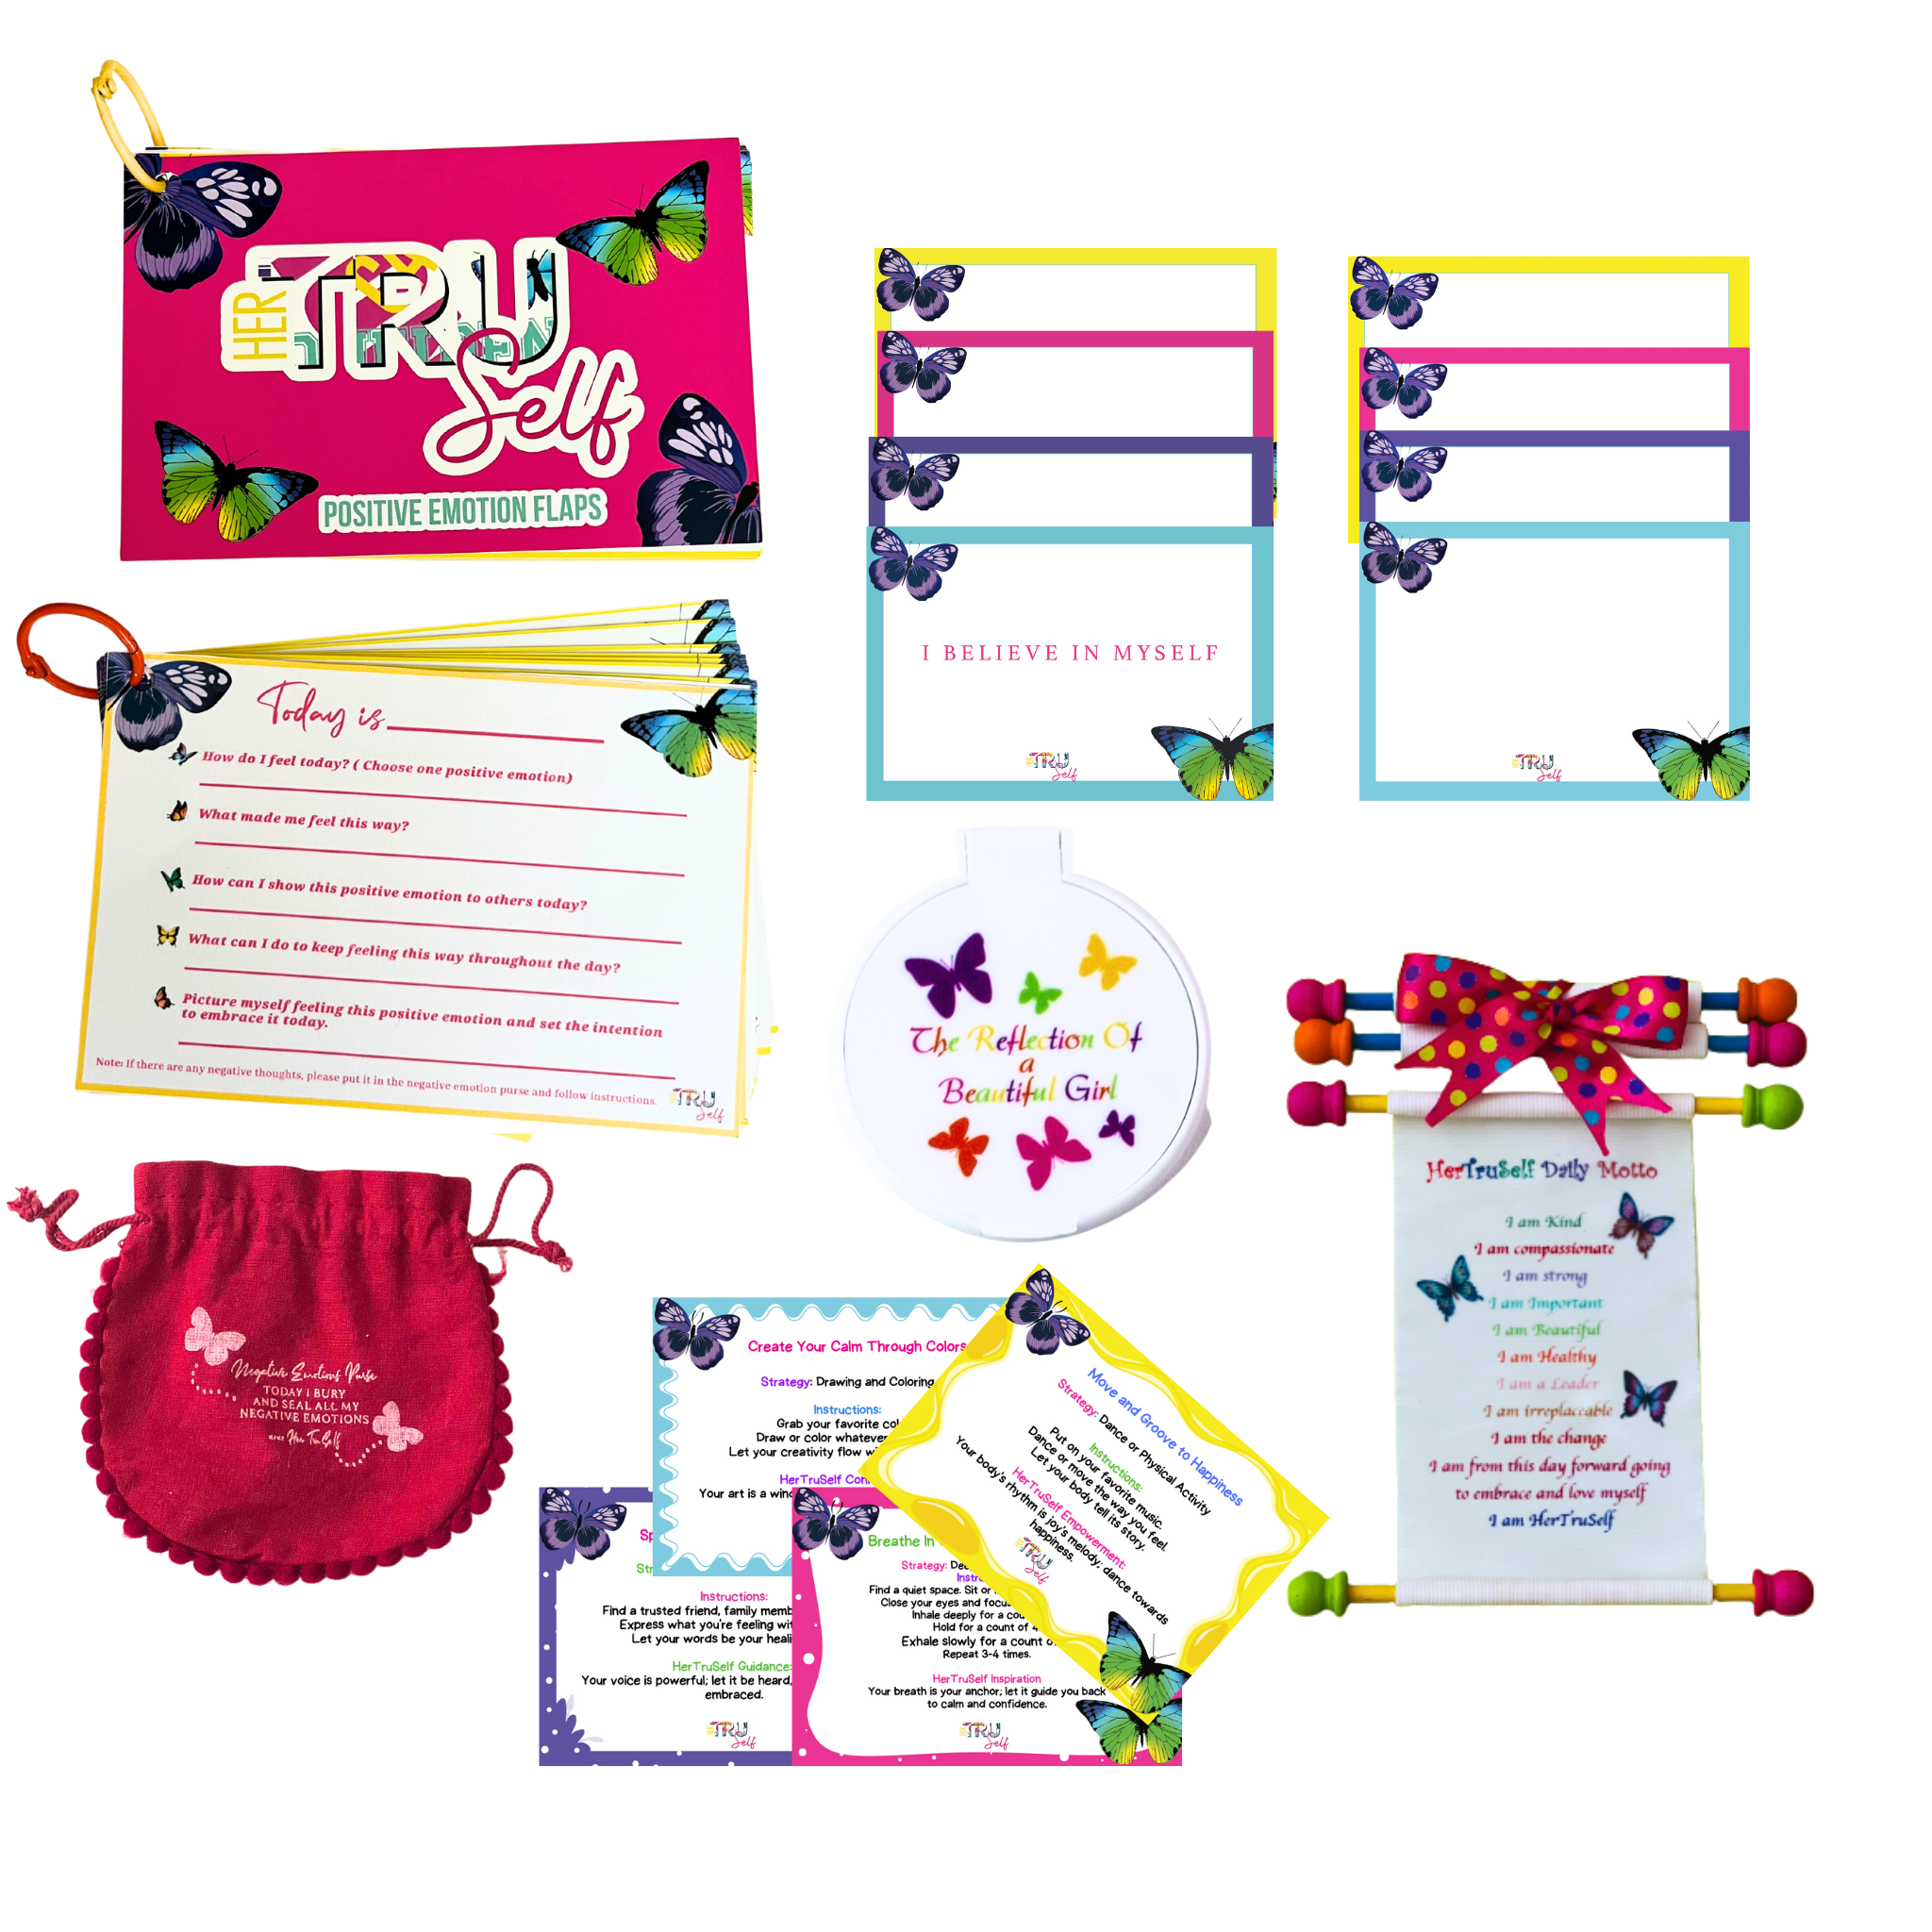 Activity Toolbox 1 (ages 6-14)